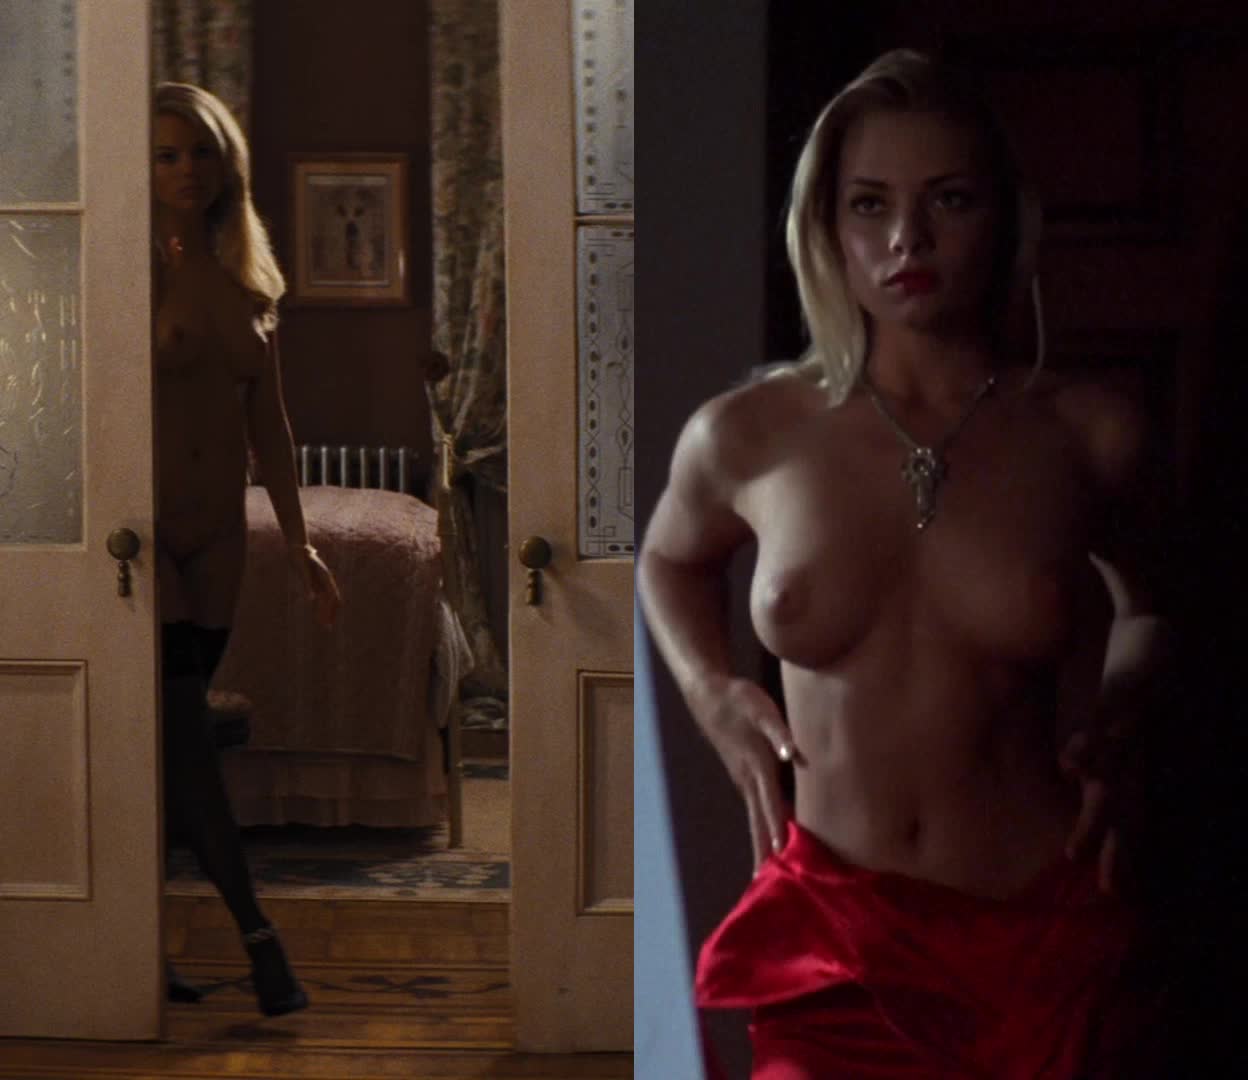 Nude celebs: Margot Robbie full frontal in The Wolf of Wall Street an...